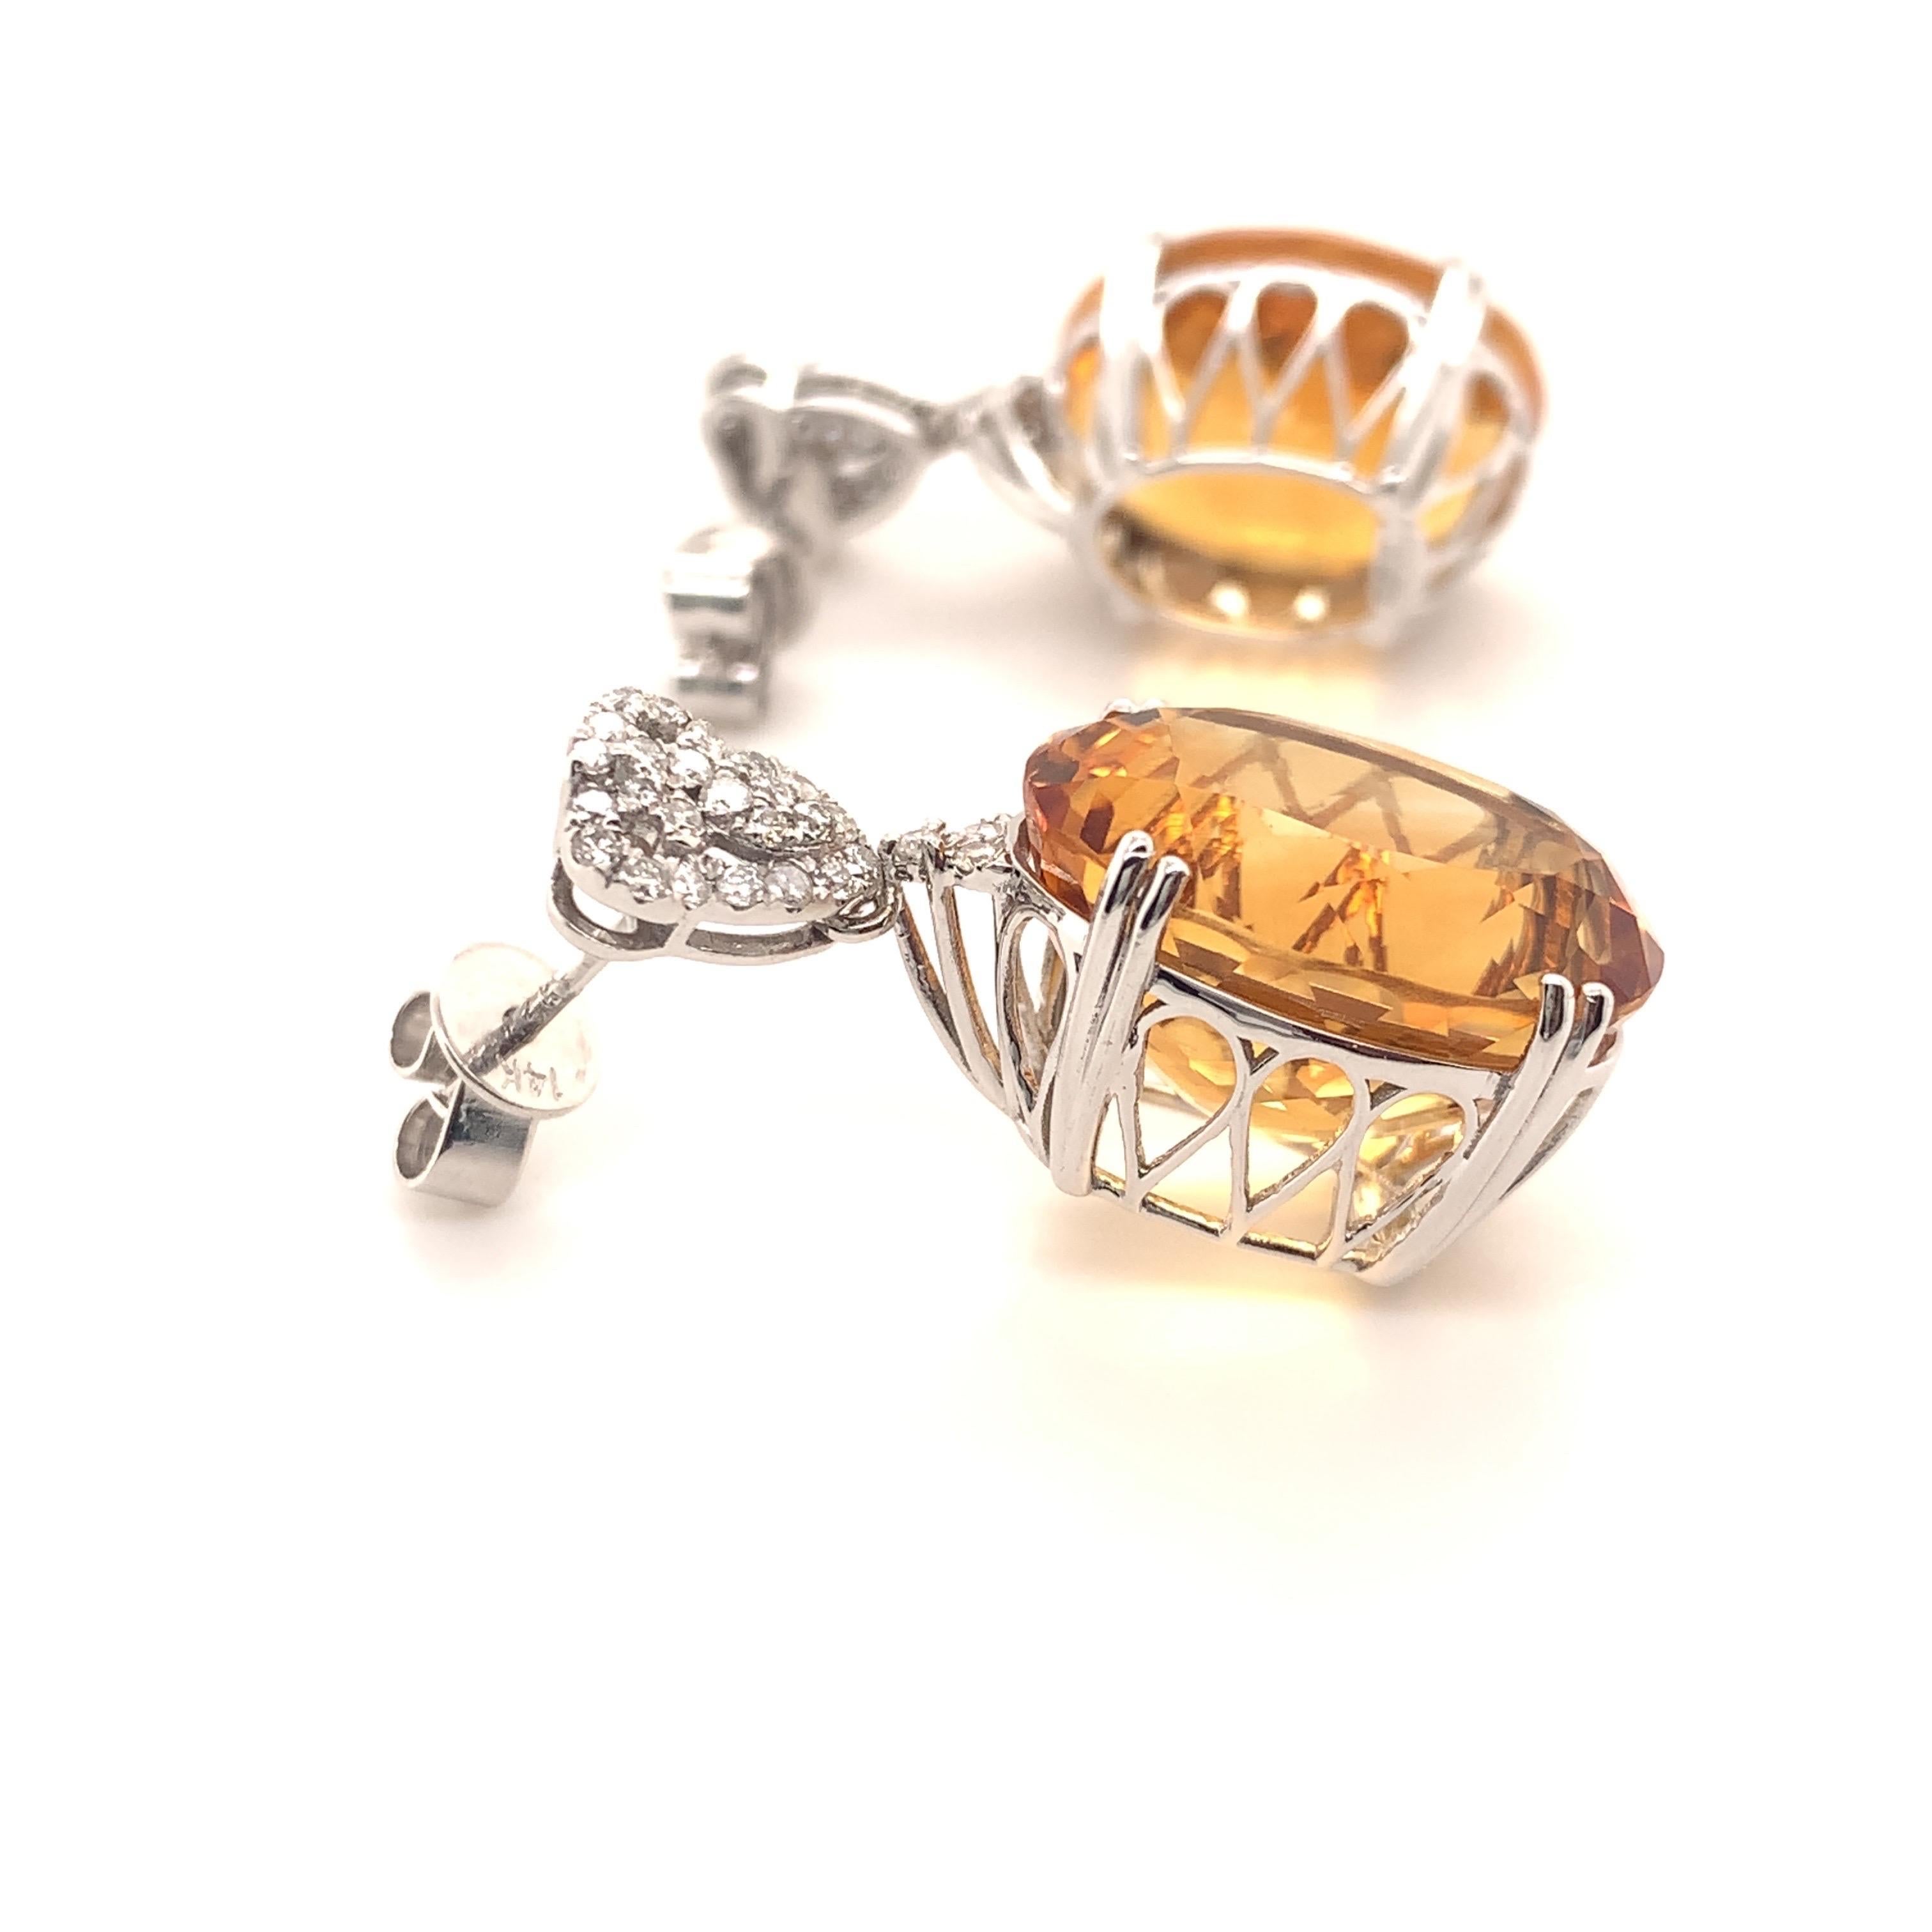 Stunning dangling citrine diamond earrings. High brilliance, golden honey tone, transparent clean, oval faceted natural 22.07 carat citrine mounted in an open basket with 8 bead prongs, accented with round brilliant cut diamonds. Handcrafted design